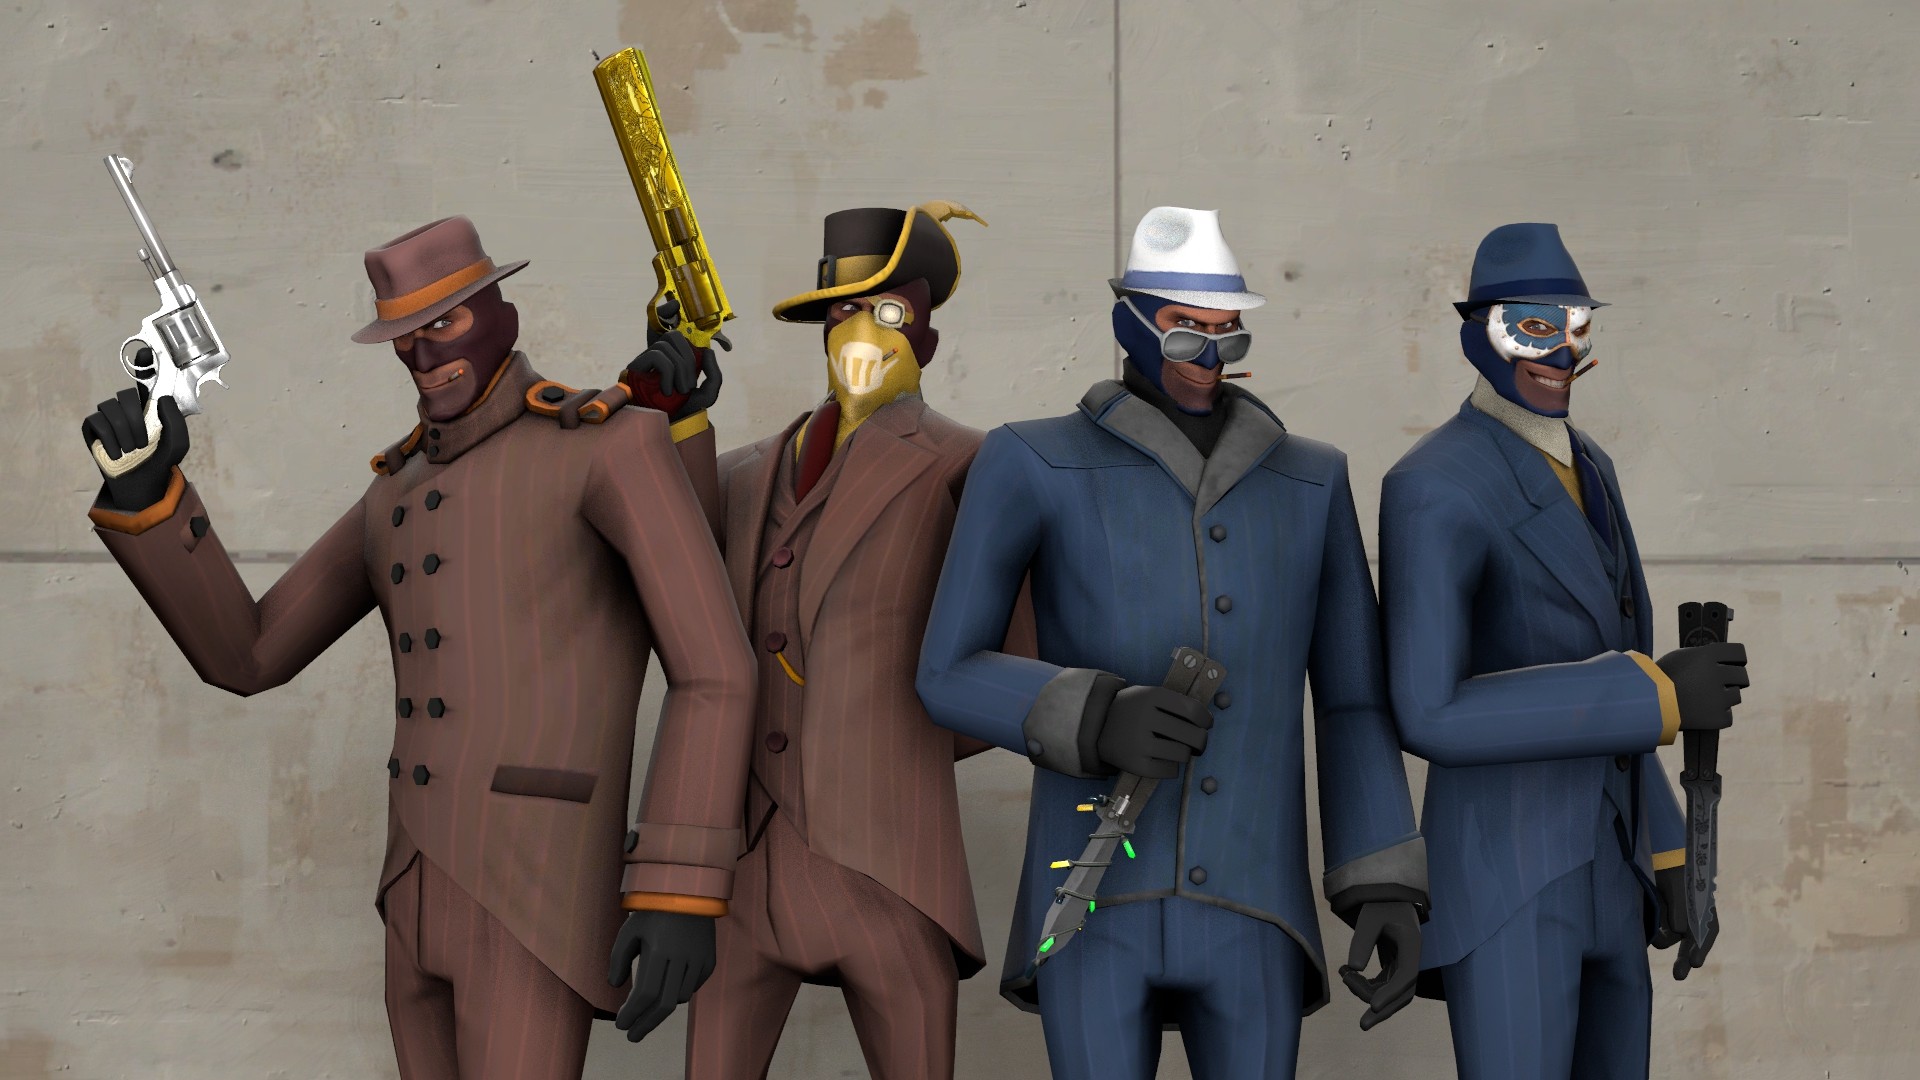 1920x1080 meet the spies tf2 wallpaper hd download hd background wallpapers free cool  tablet smart phone 4k high definition 1920Ã1080 Wallpaper HD